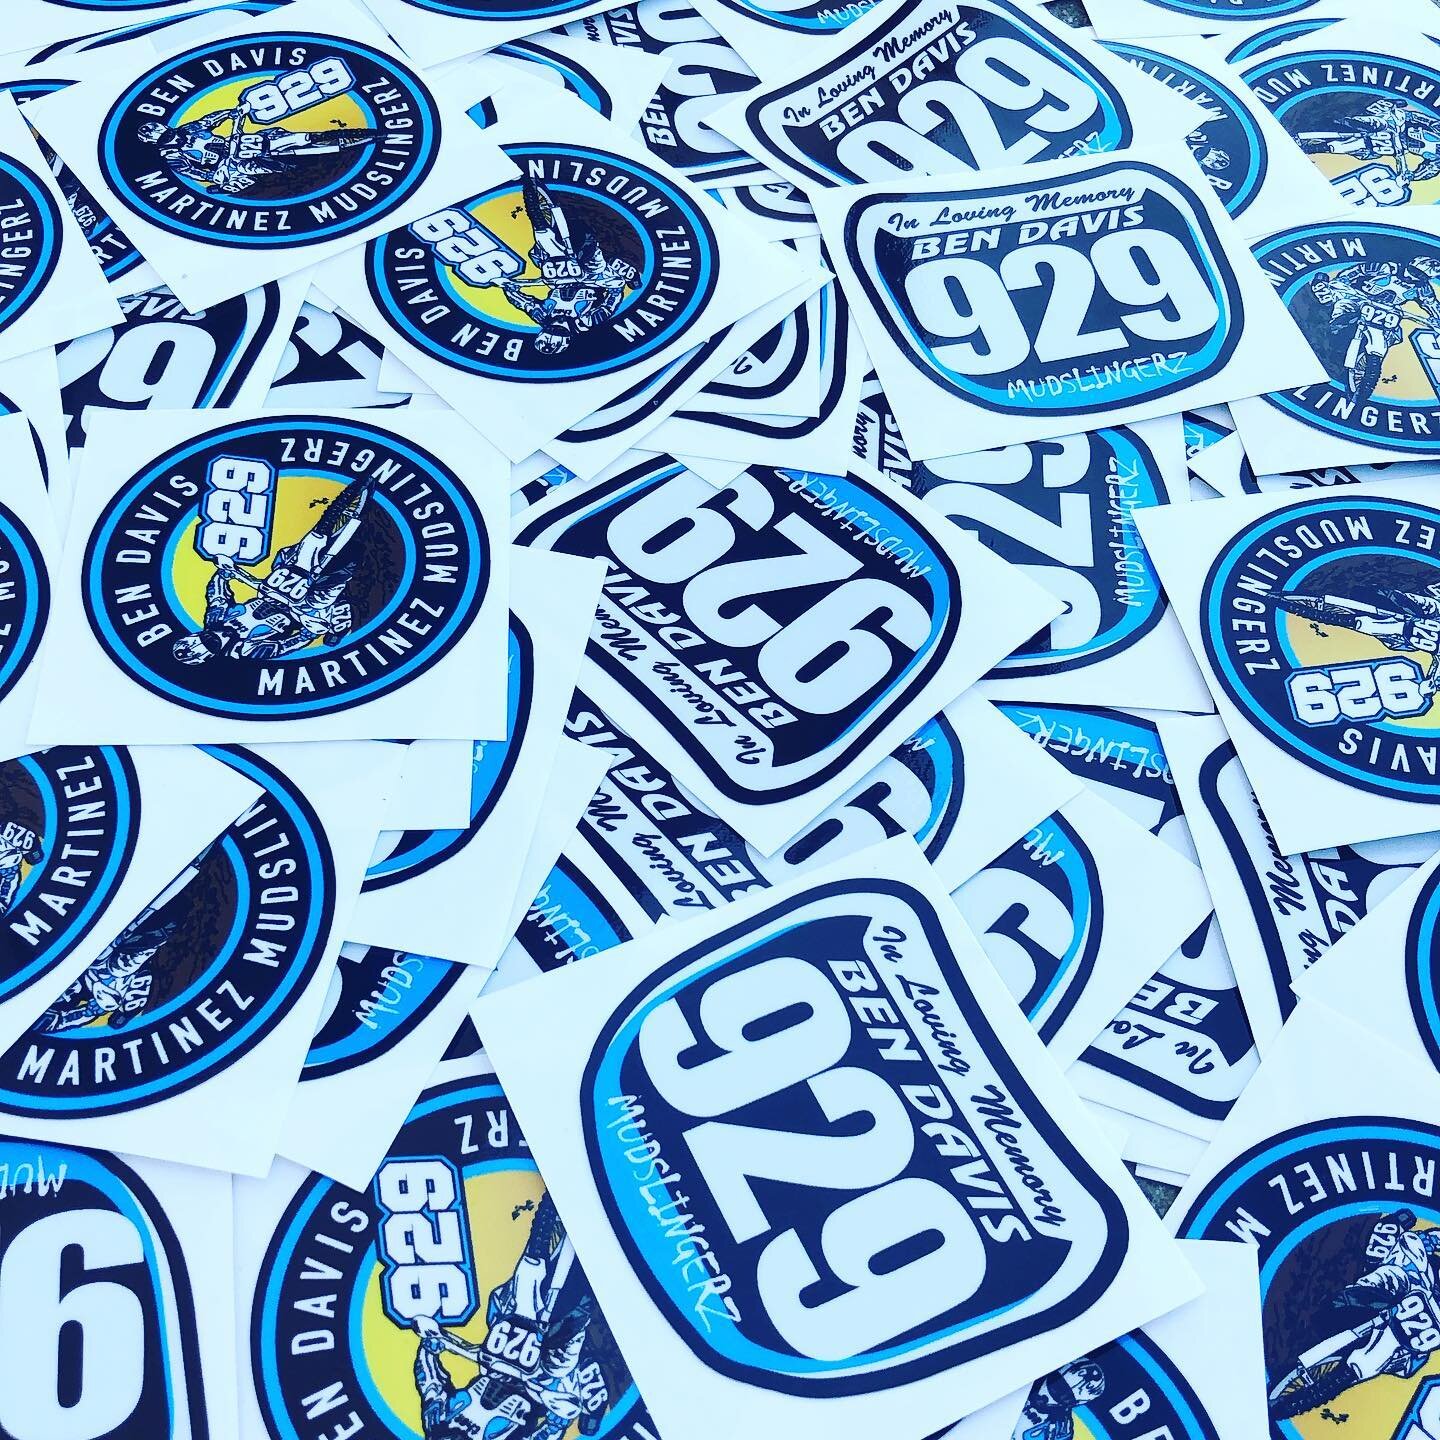 This week we will be giving away as many 929 stickers as we can in honor of Ben. Stop by J&amp;D and grab a few 8:00-4:00 all week.